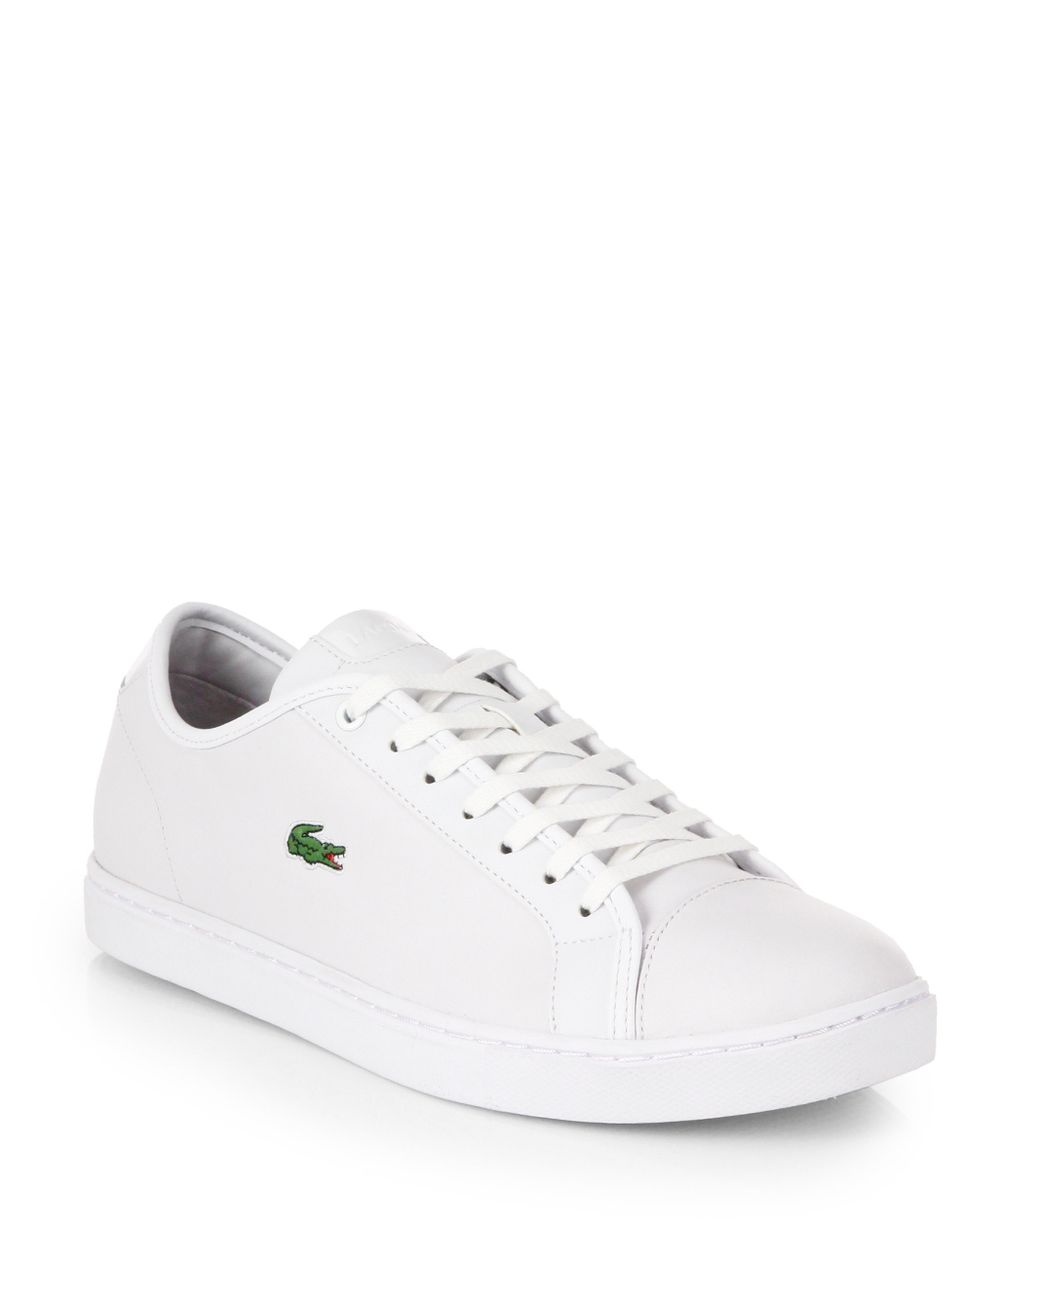 Lacoste Leather Tennis Shoes White for Men | Lyst